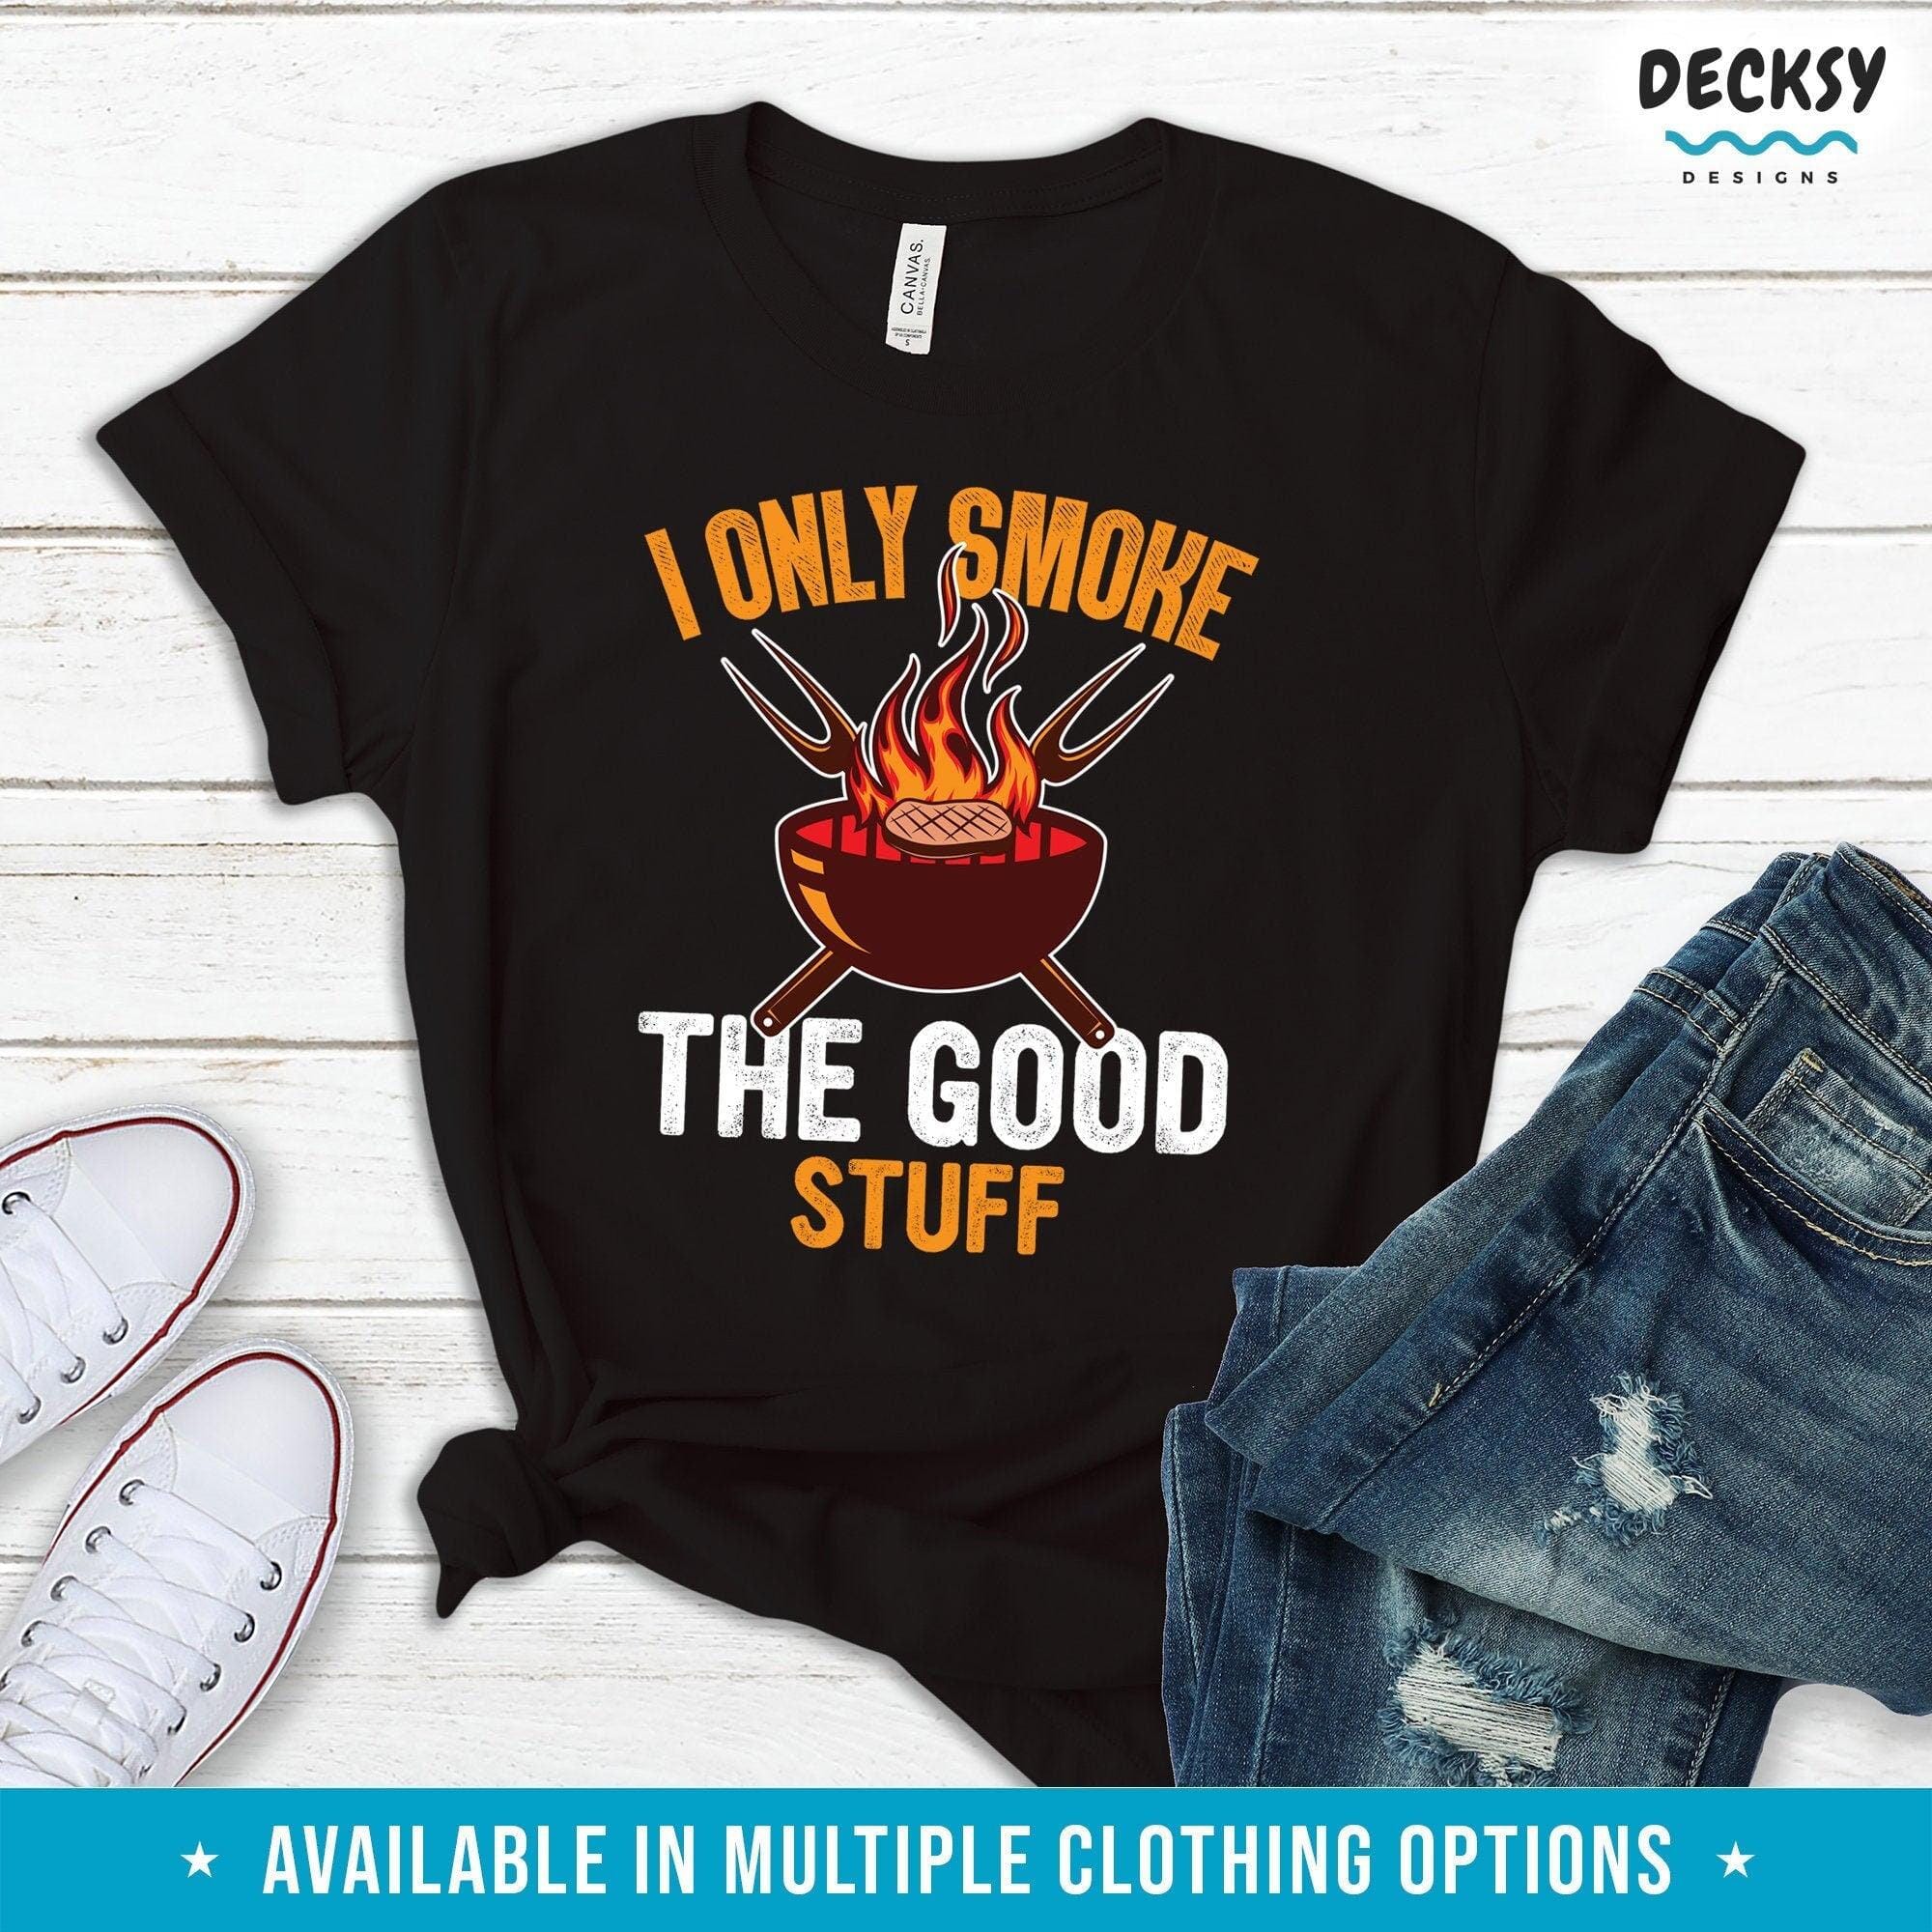 Grill Master Shirt, Funny Bbq Gift-Clothing:Gender-Neutral Adult Clothing:Tops & Tees:T-shirts:Graphic Tees-DecksyDesigns